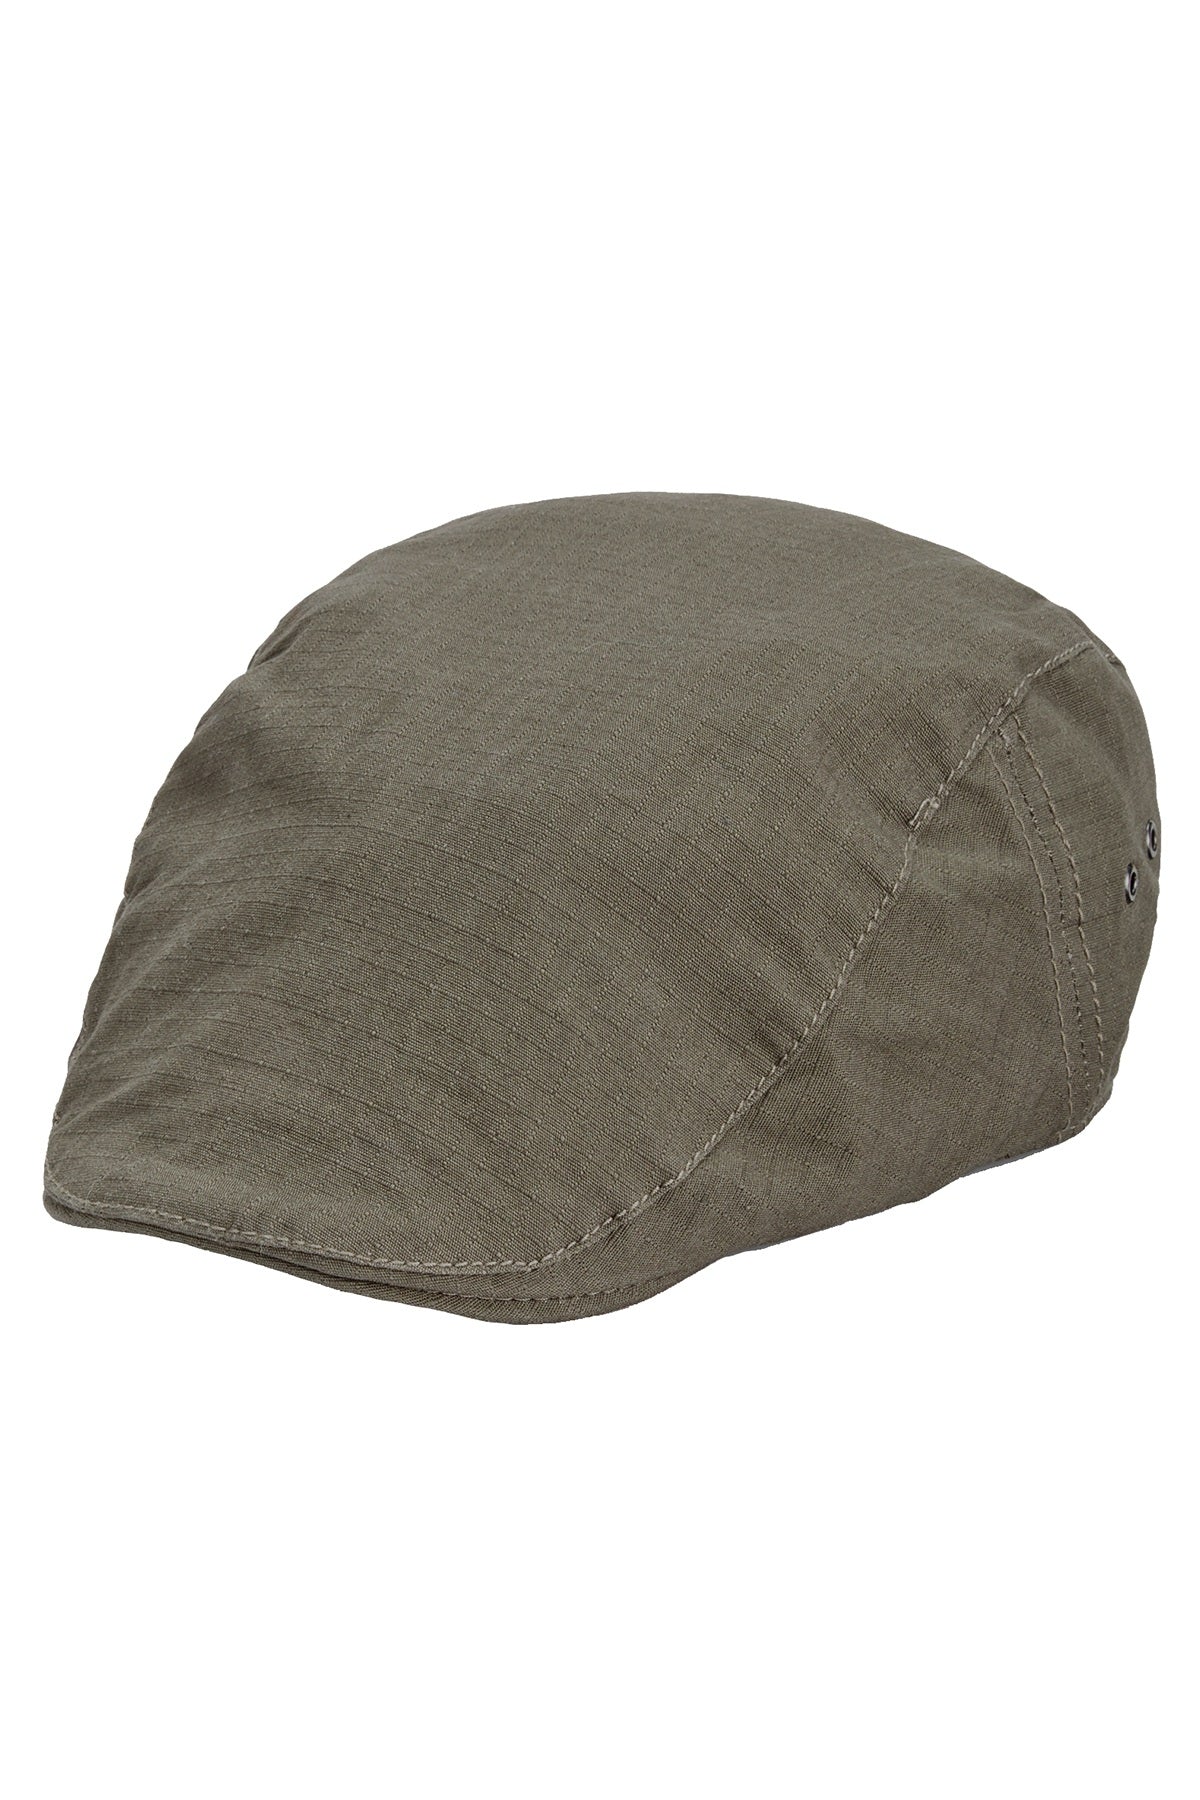 Levi's Olive Ripstop Ivy Hat